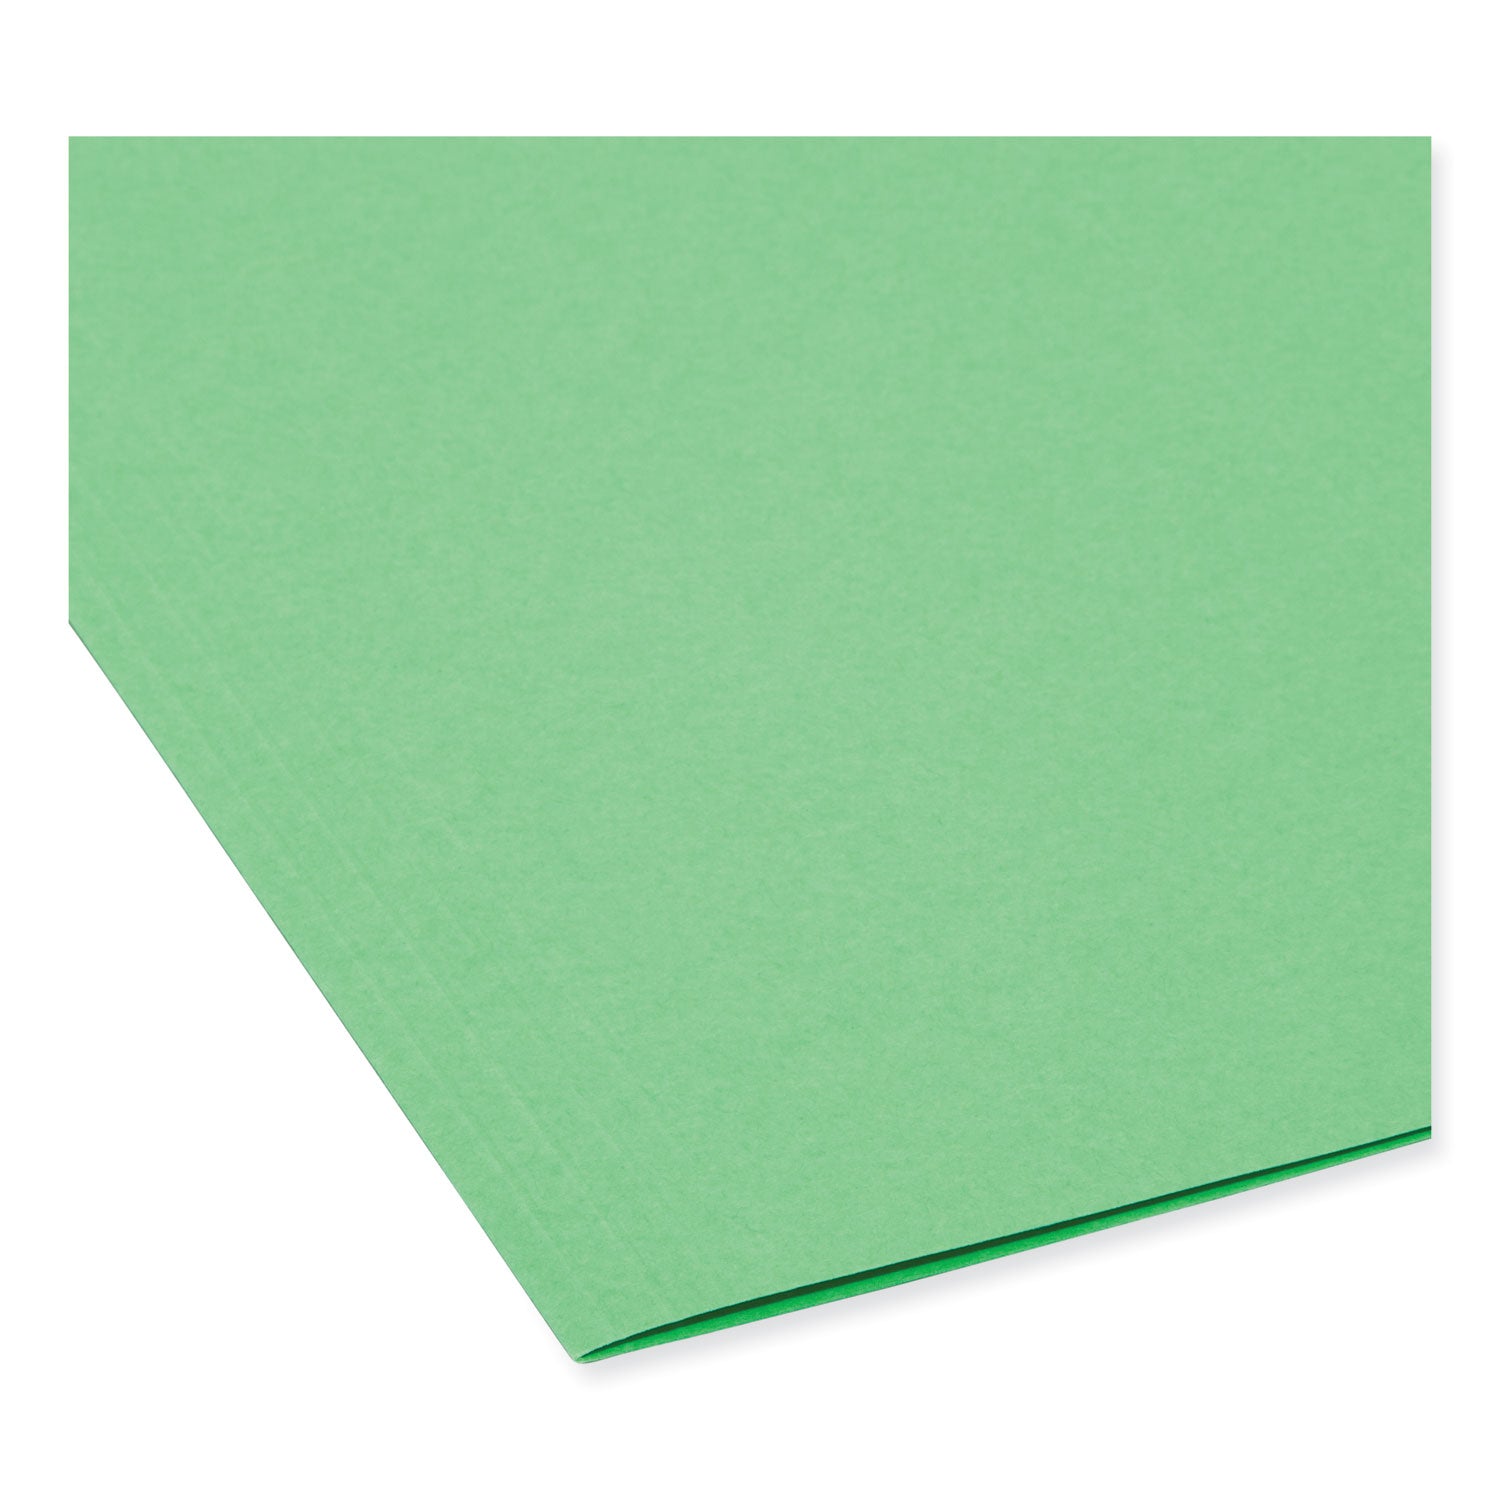 TUFF Hanging Folders with Easy Slide Tab, Letter Size, 1/3-Cut Tabs, Green, 18/Box - 